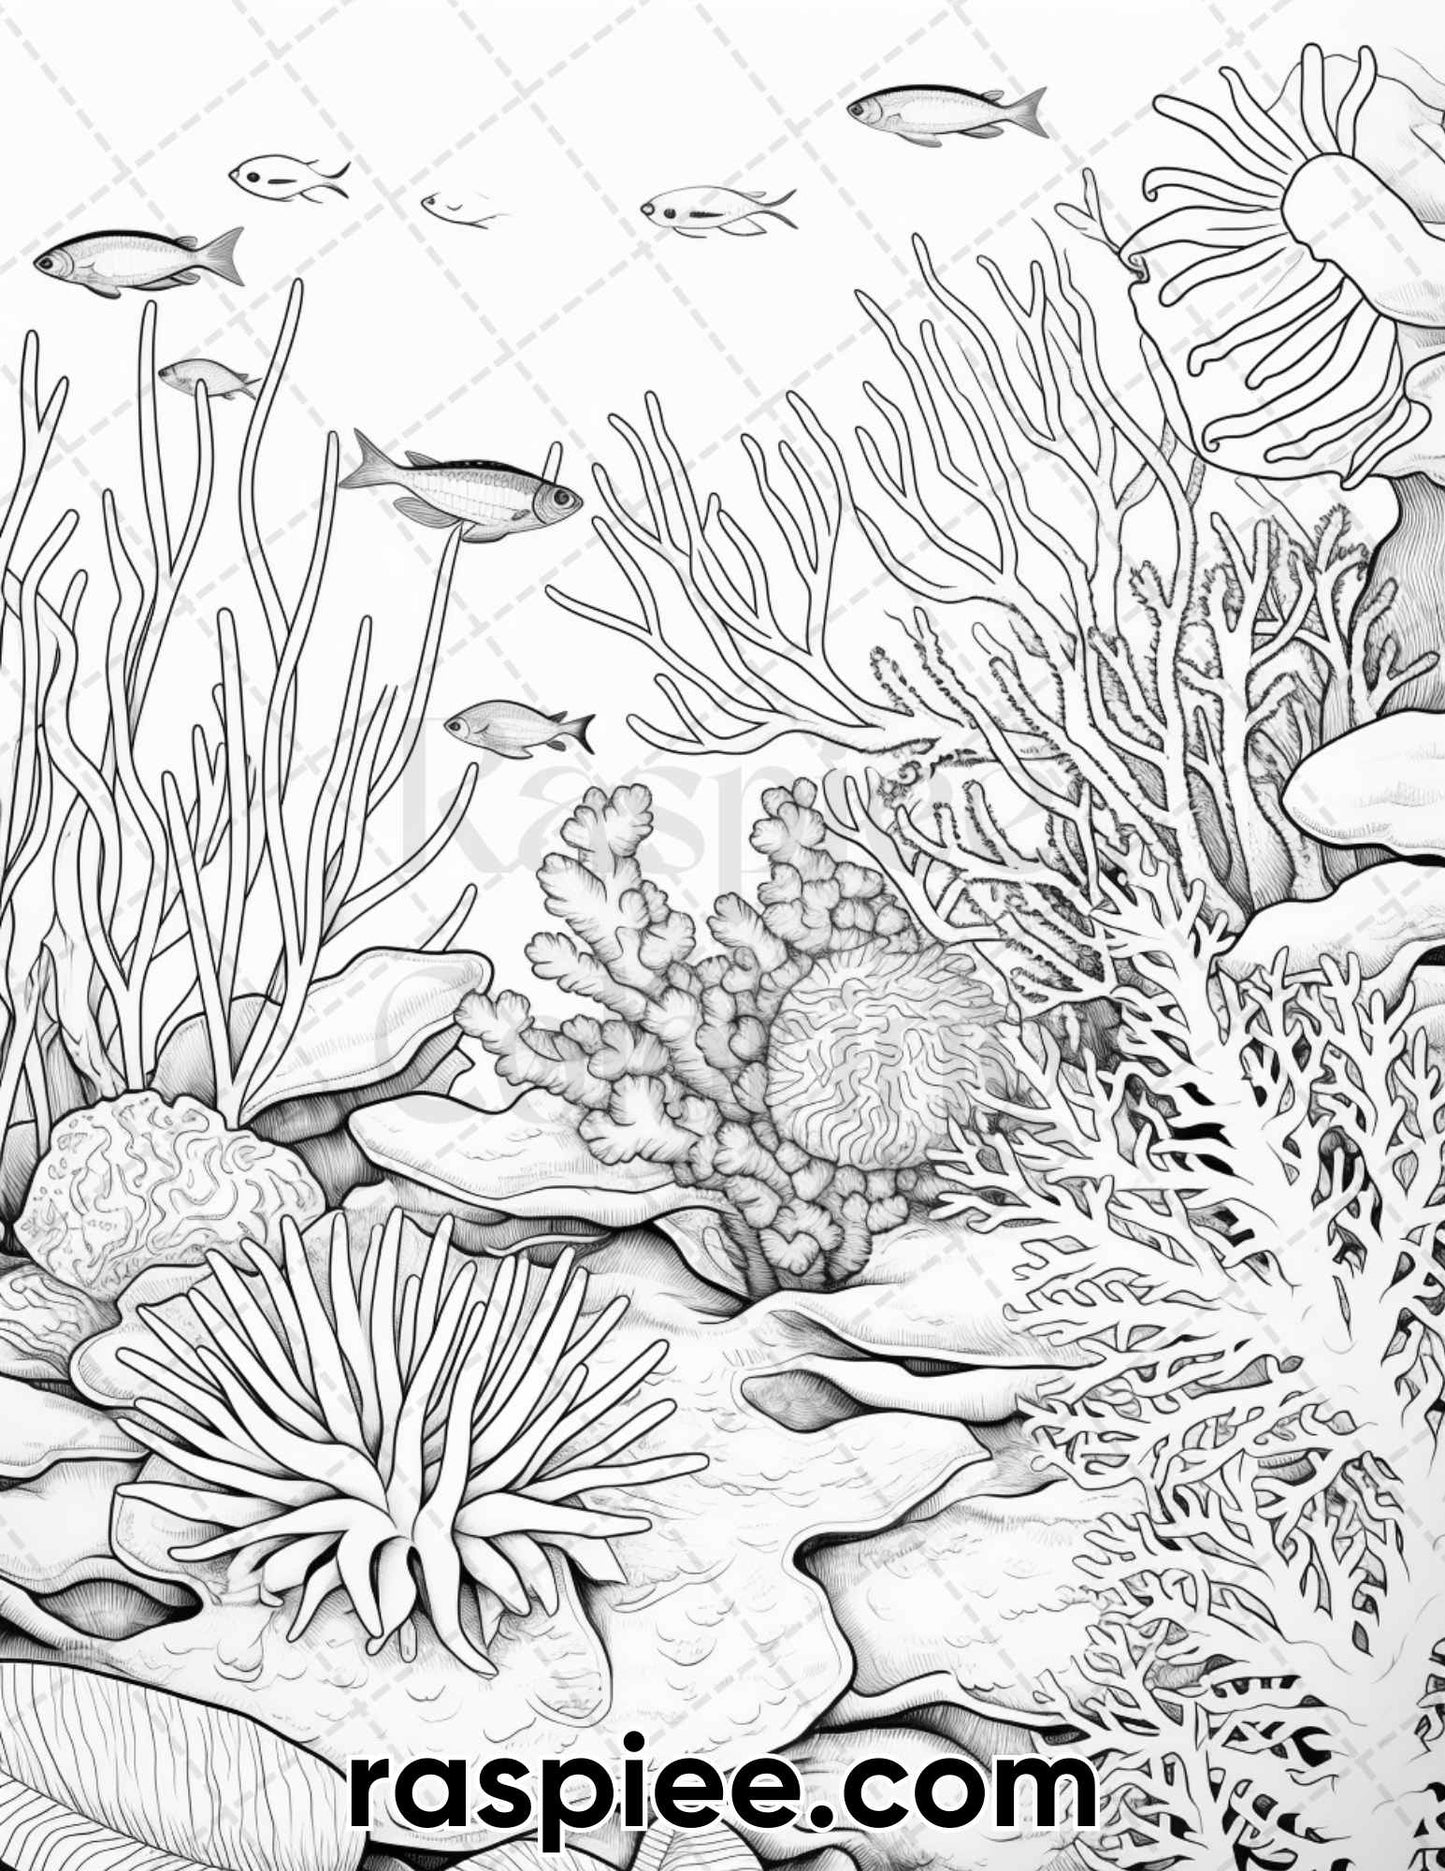 adult coloring pages, adult coloring sheets, adult coloring book pdf, adult coloring book printable, grayscale coloring pages, grayscale coloring books, summer coloring pages for adults, summer coloring book, coral garden coloring pages, sea coloring pages